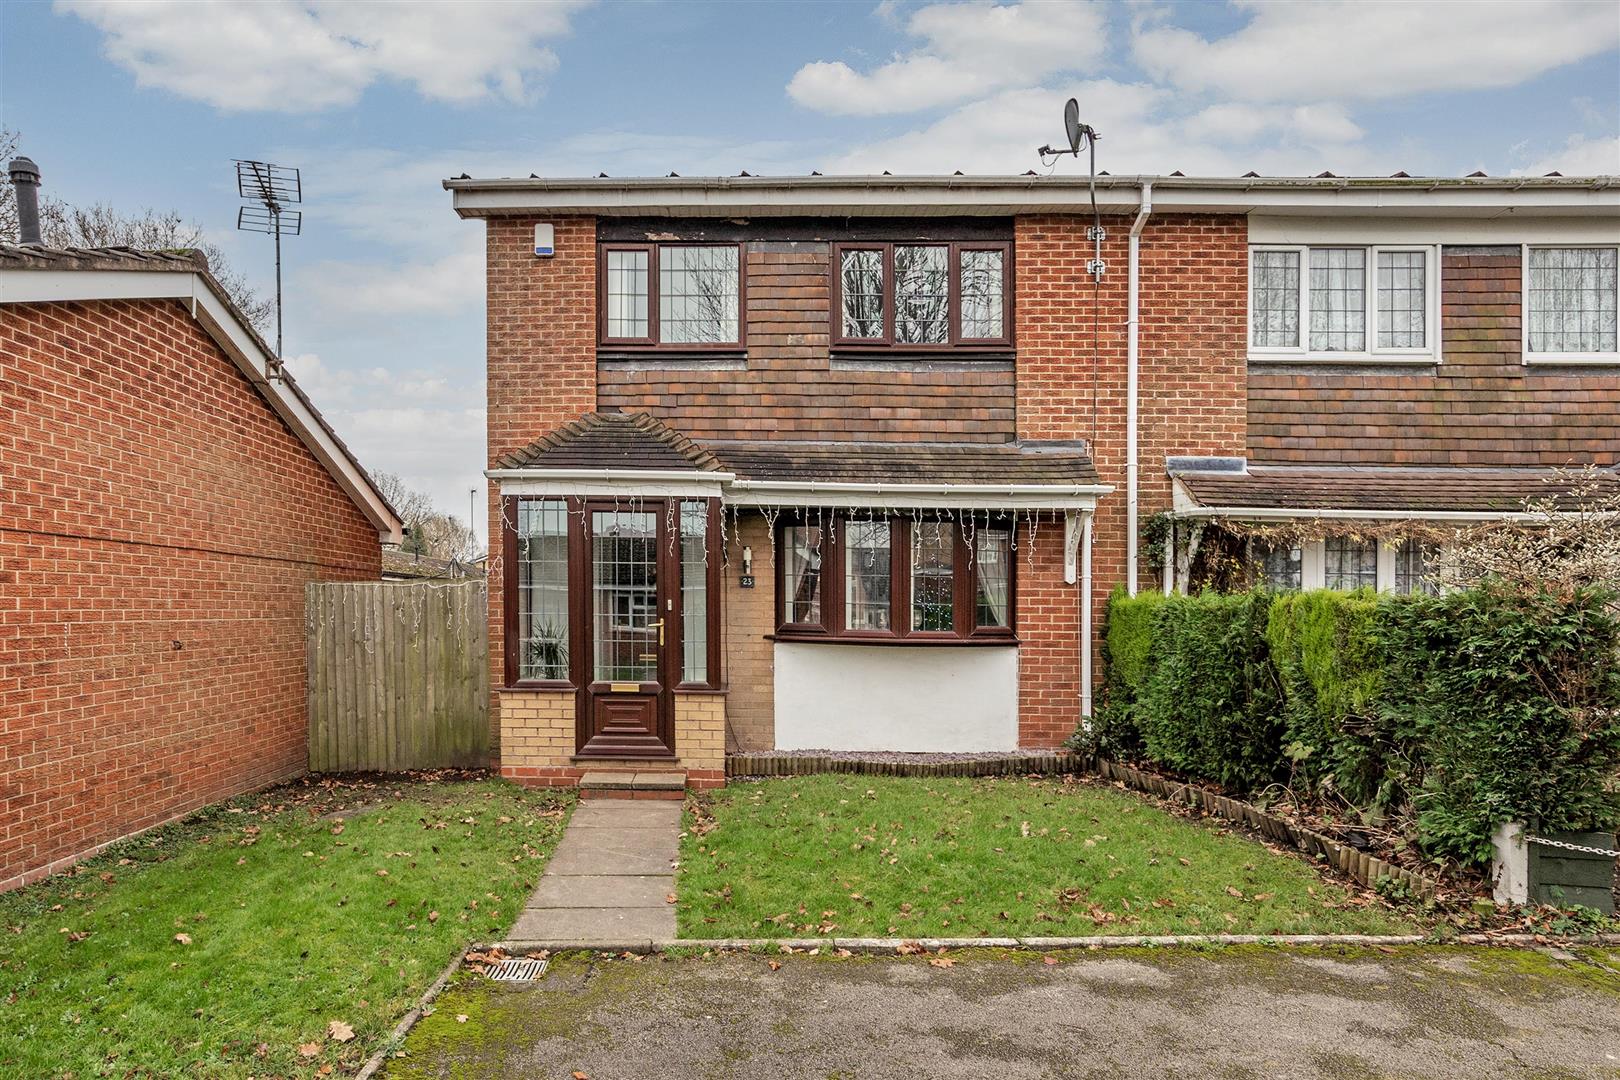 3 bed  for sale in Baxters Green, Solihull, B90 